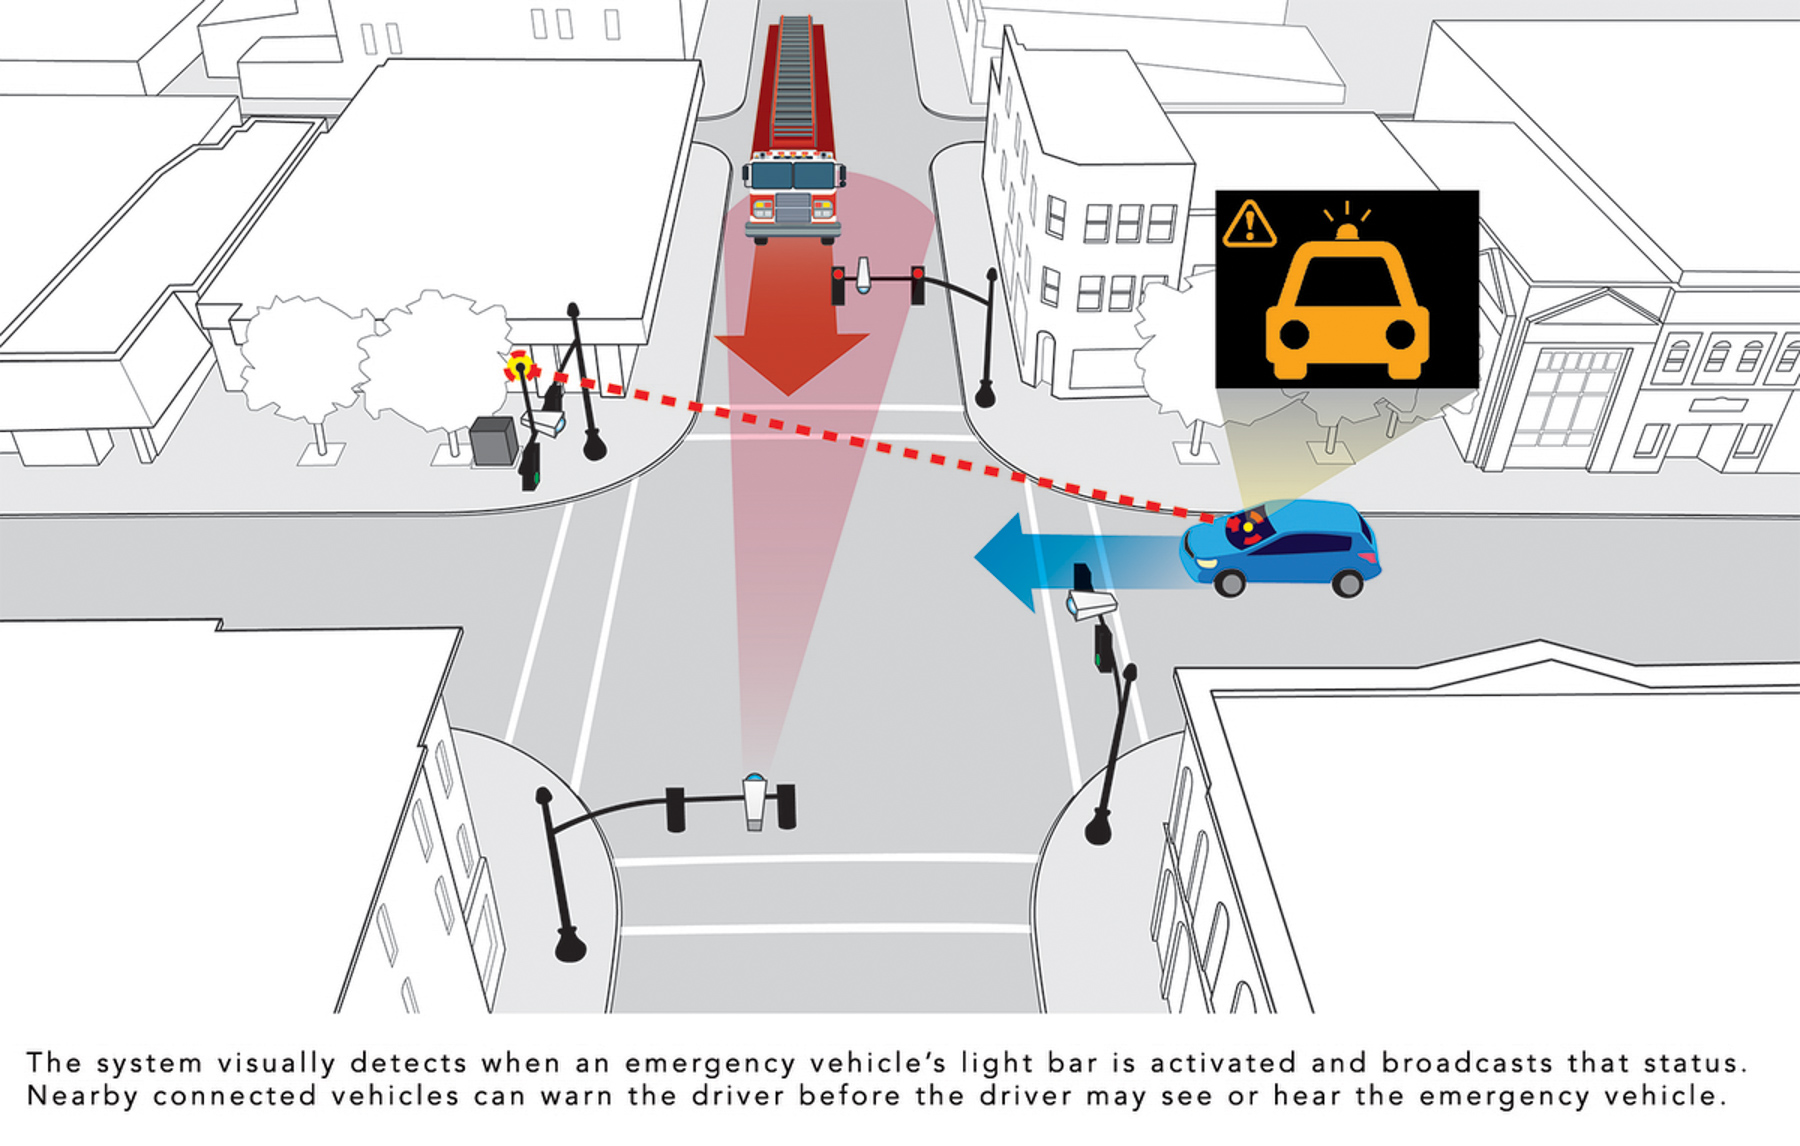 Honda Smart Intersection® Vehicle Communication Technology (V2X) is designed to reduce traffic collisions at road intersections. 